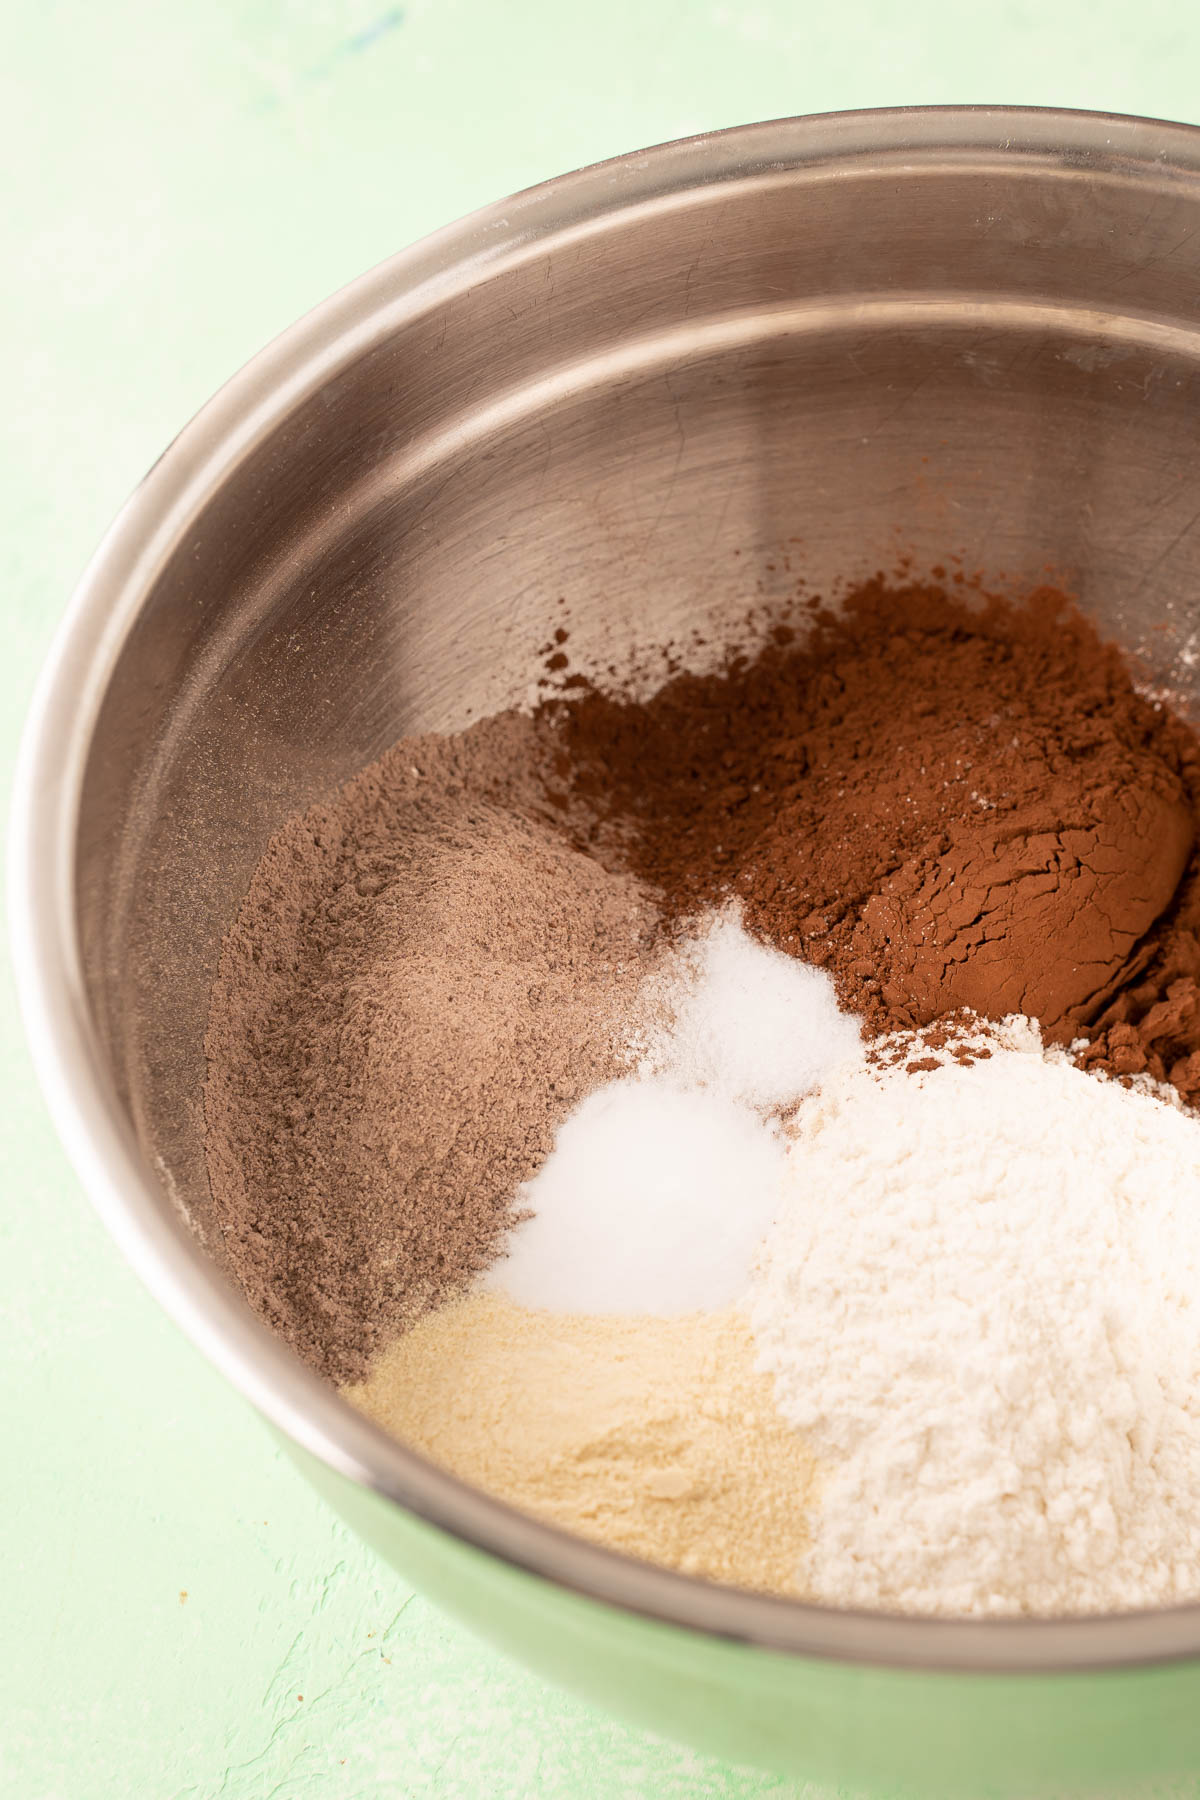 Dry ingredients to make chocolate rocky road cookies in a metal mixing bowl.